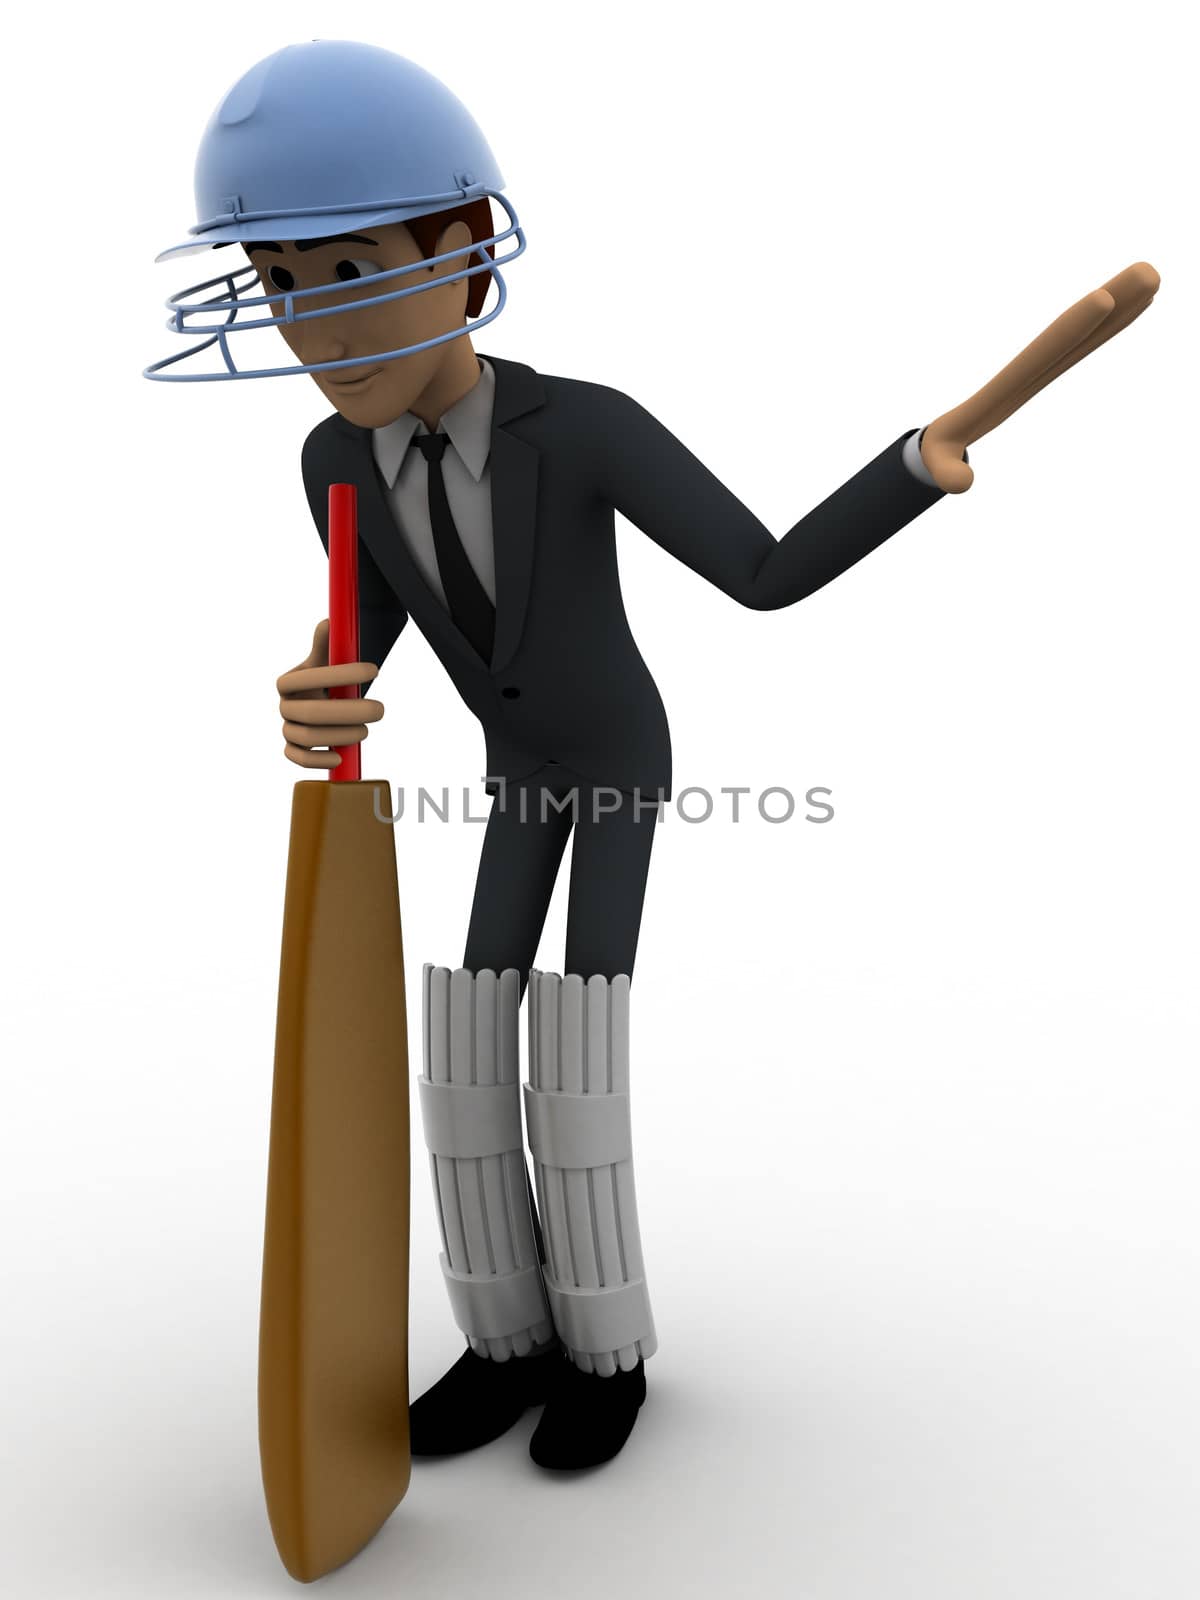 3d man cricket batsman asking to wait by showing hand concept by touchmenithin@gmail.com